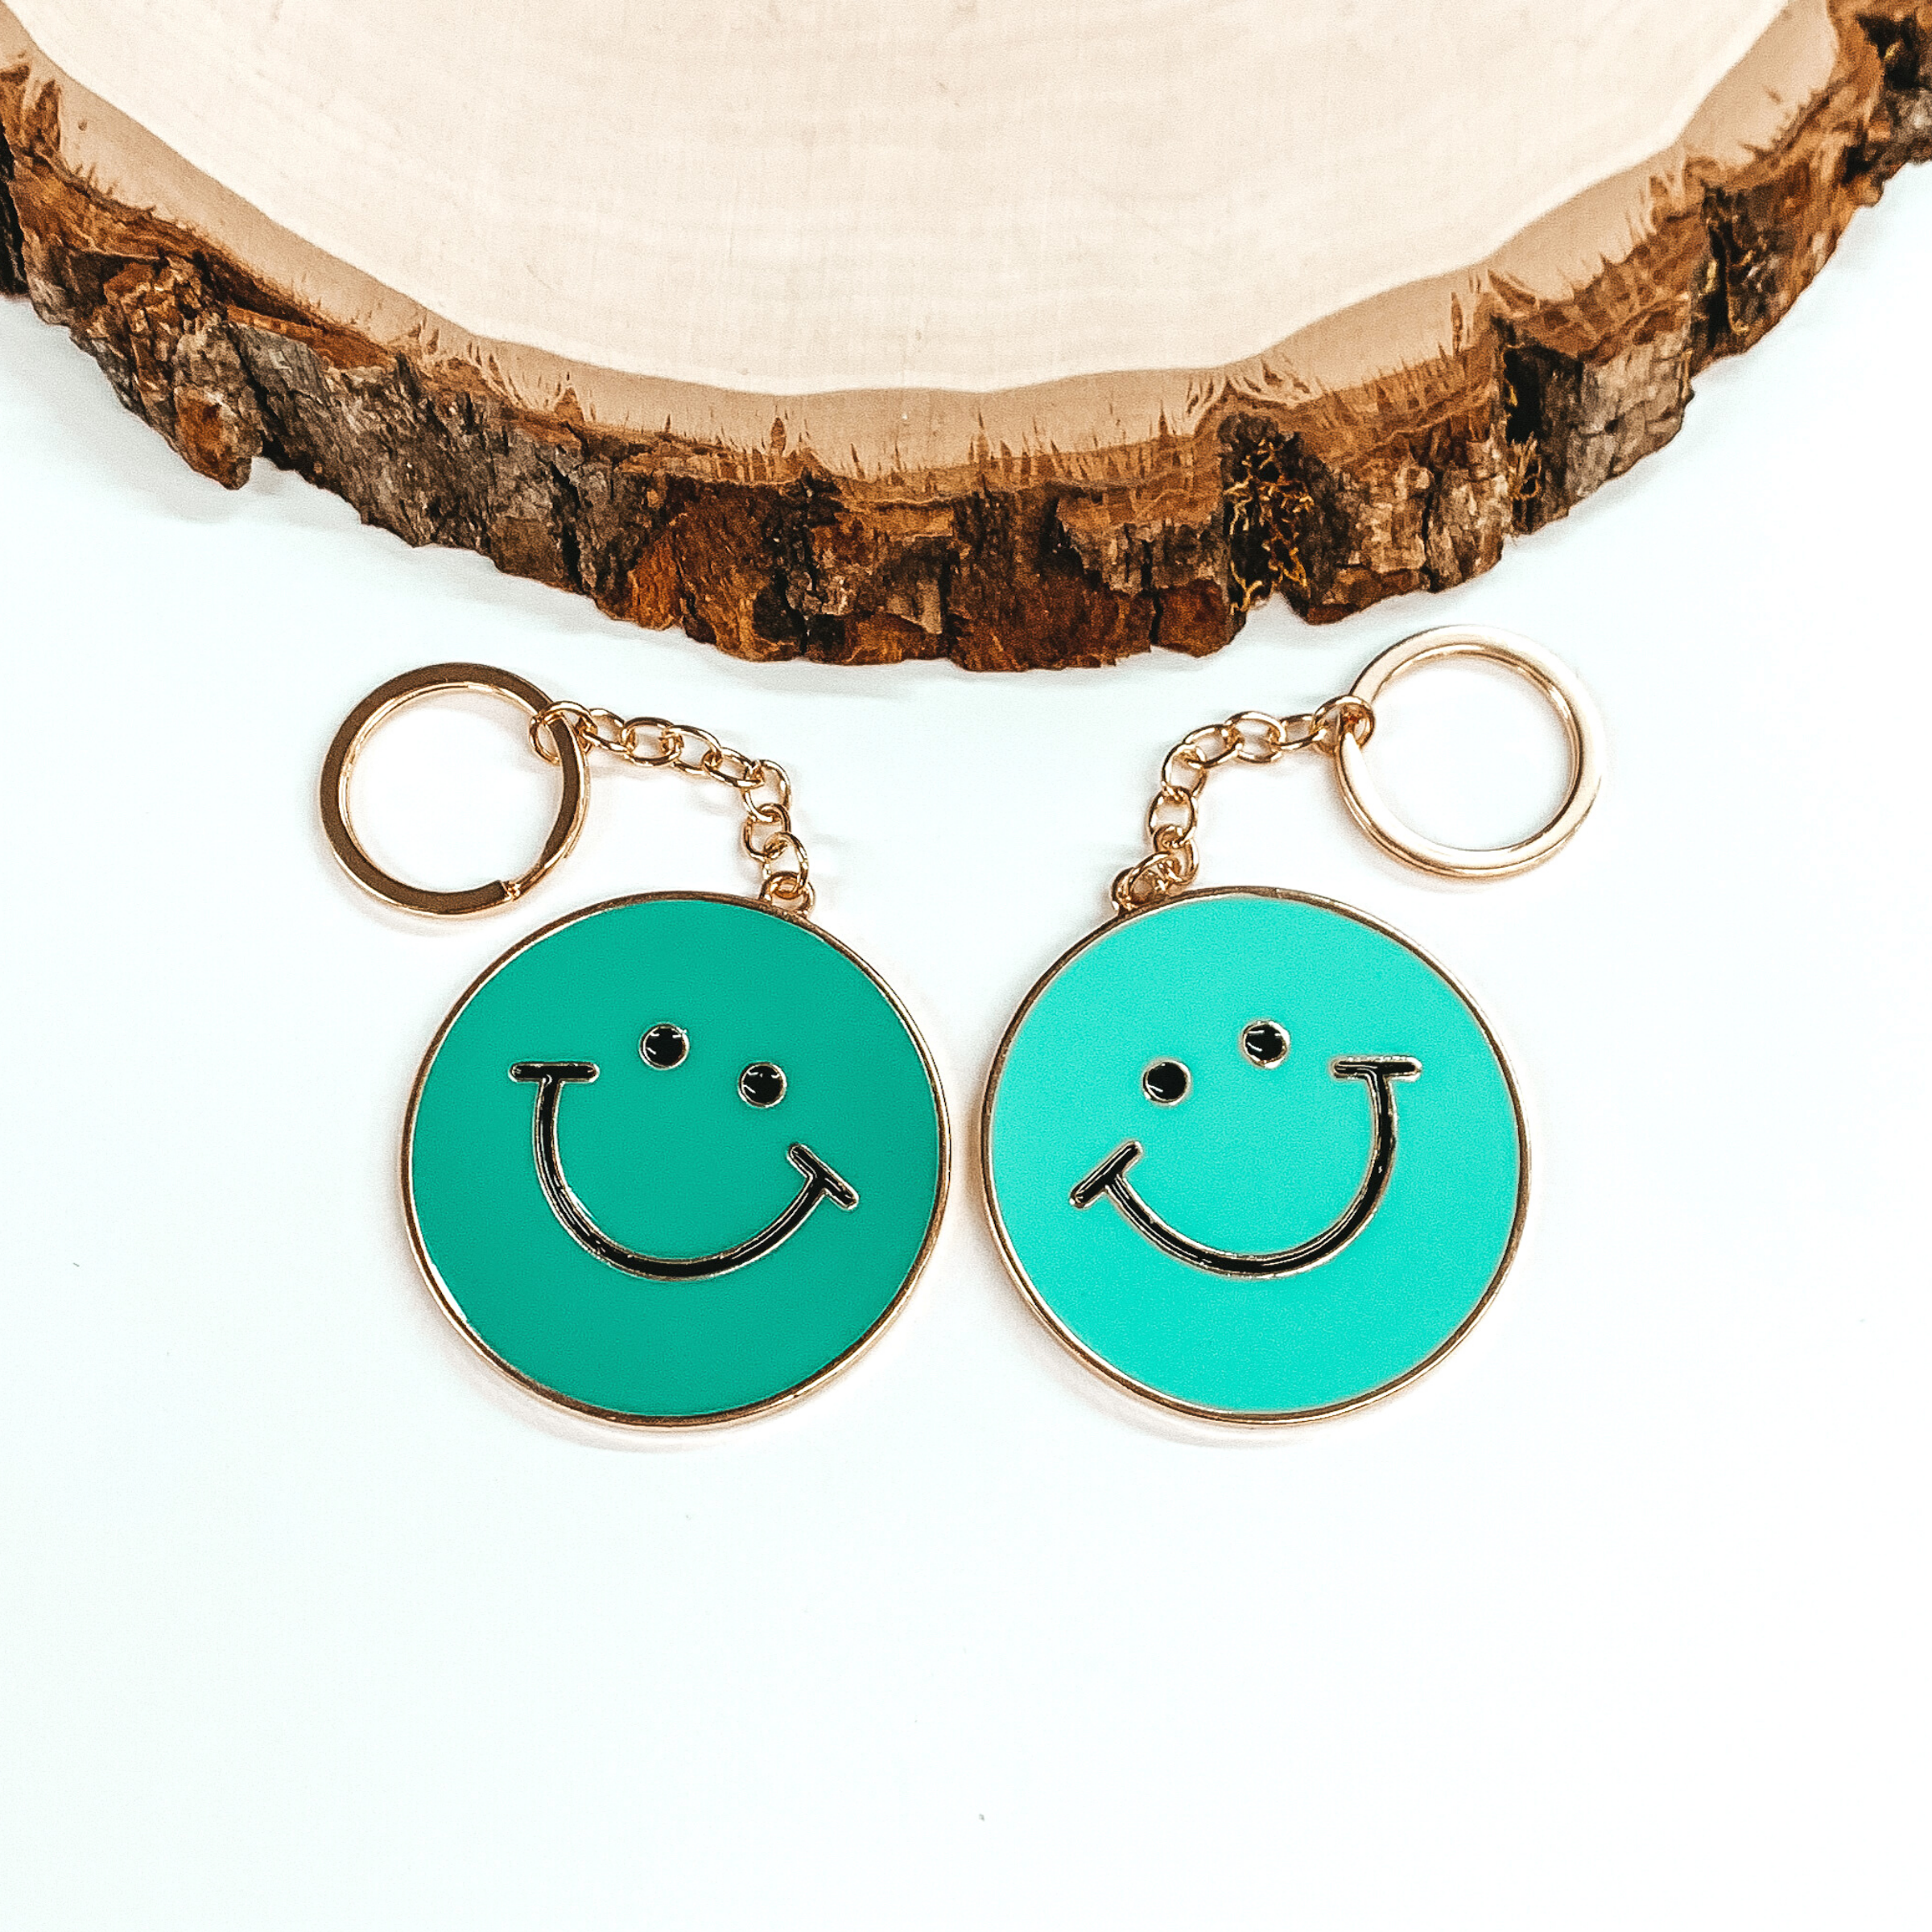 Circle Pendant Key Chain with Happy Face in Mint/Turquoise - Giddy Up Glamour Boutique